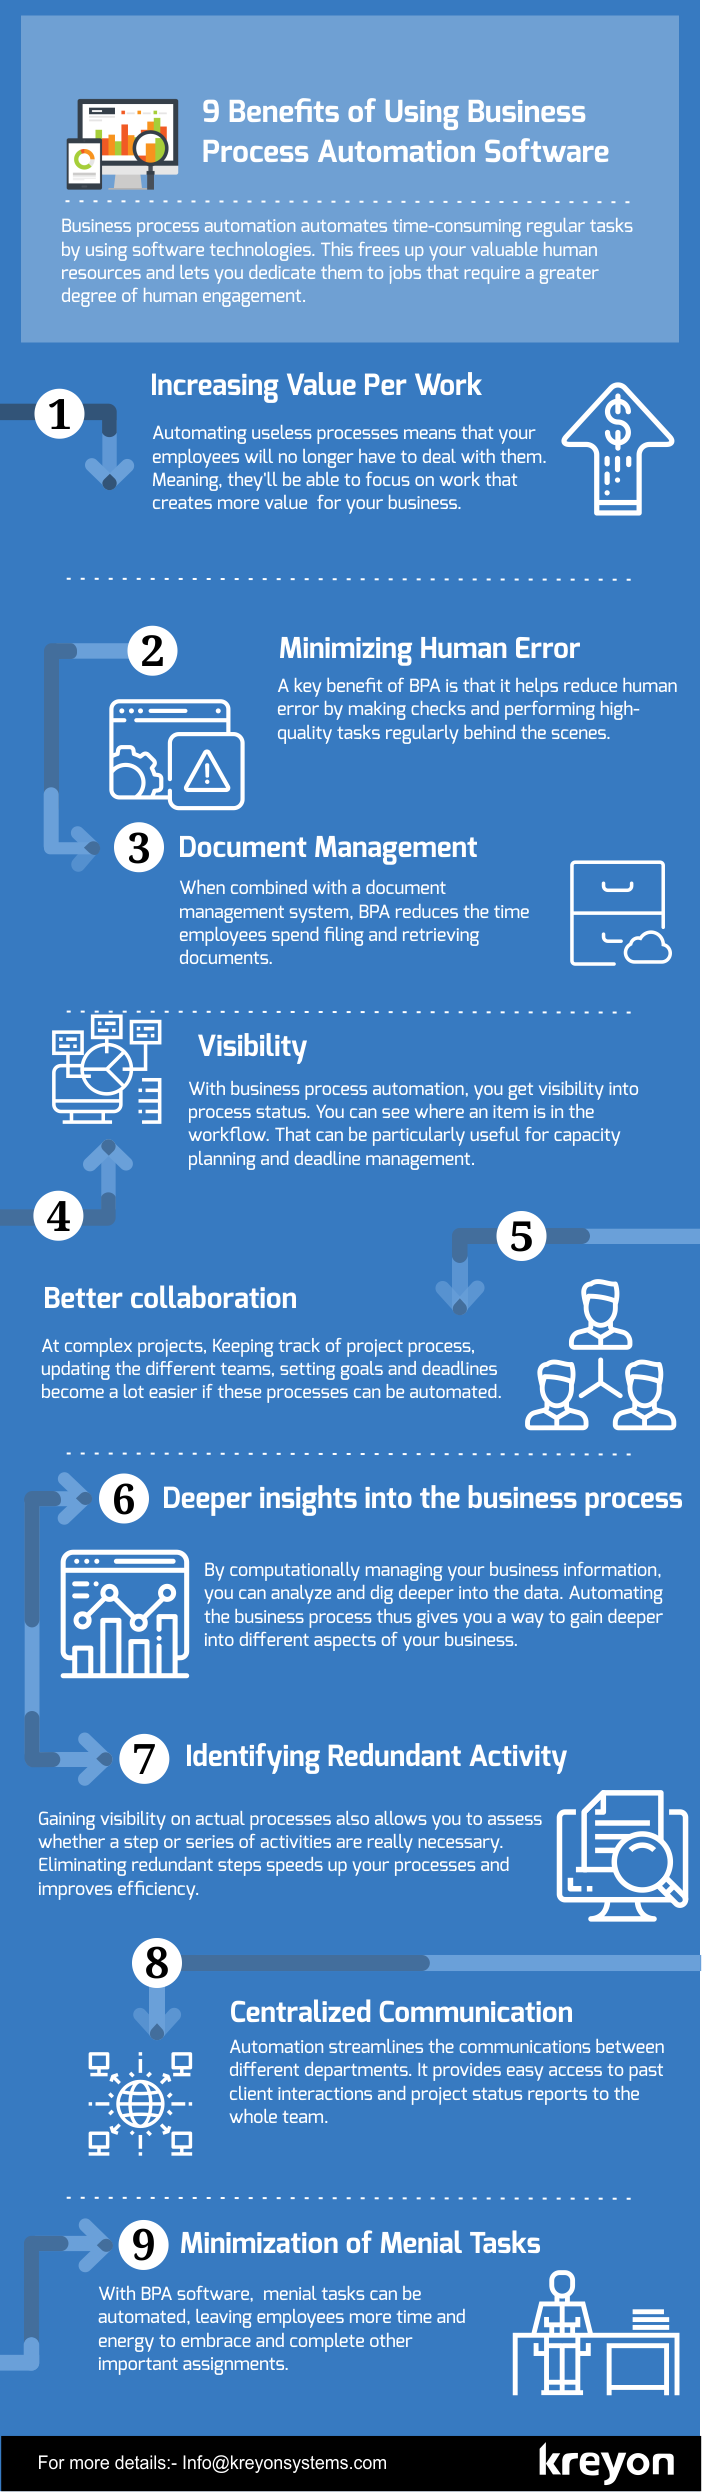 Infographic on business process automation software